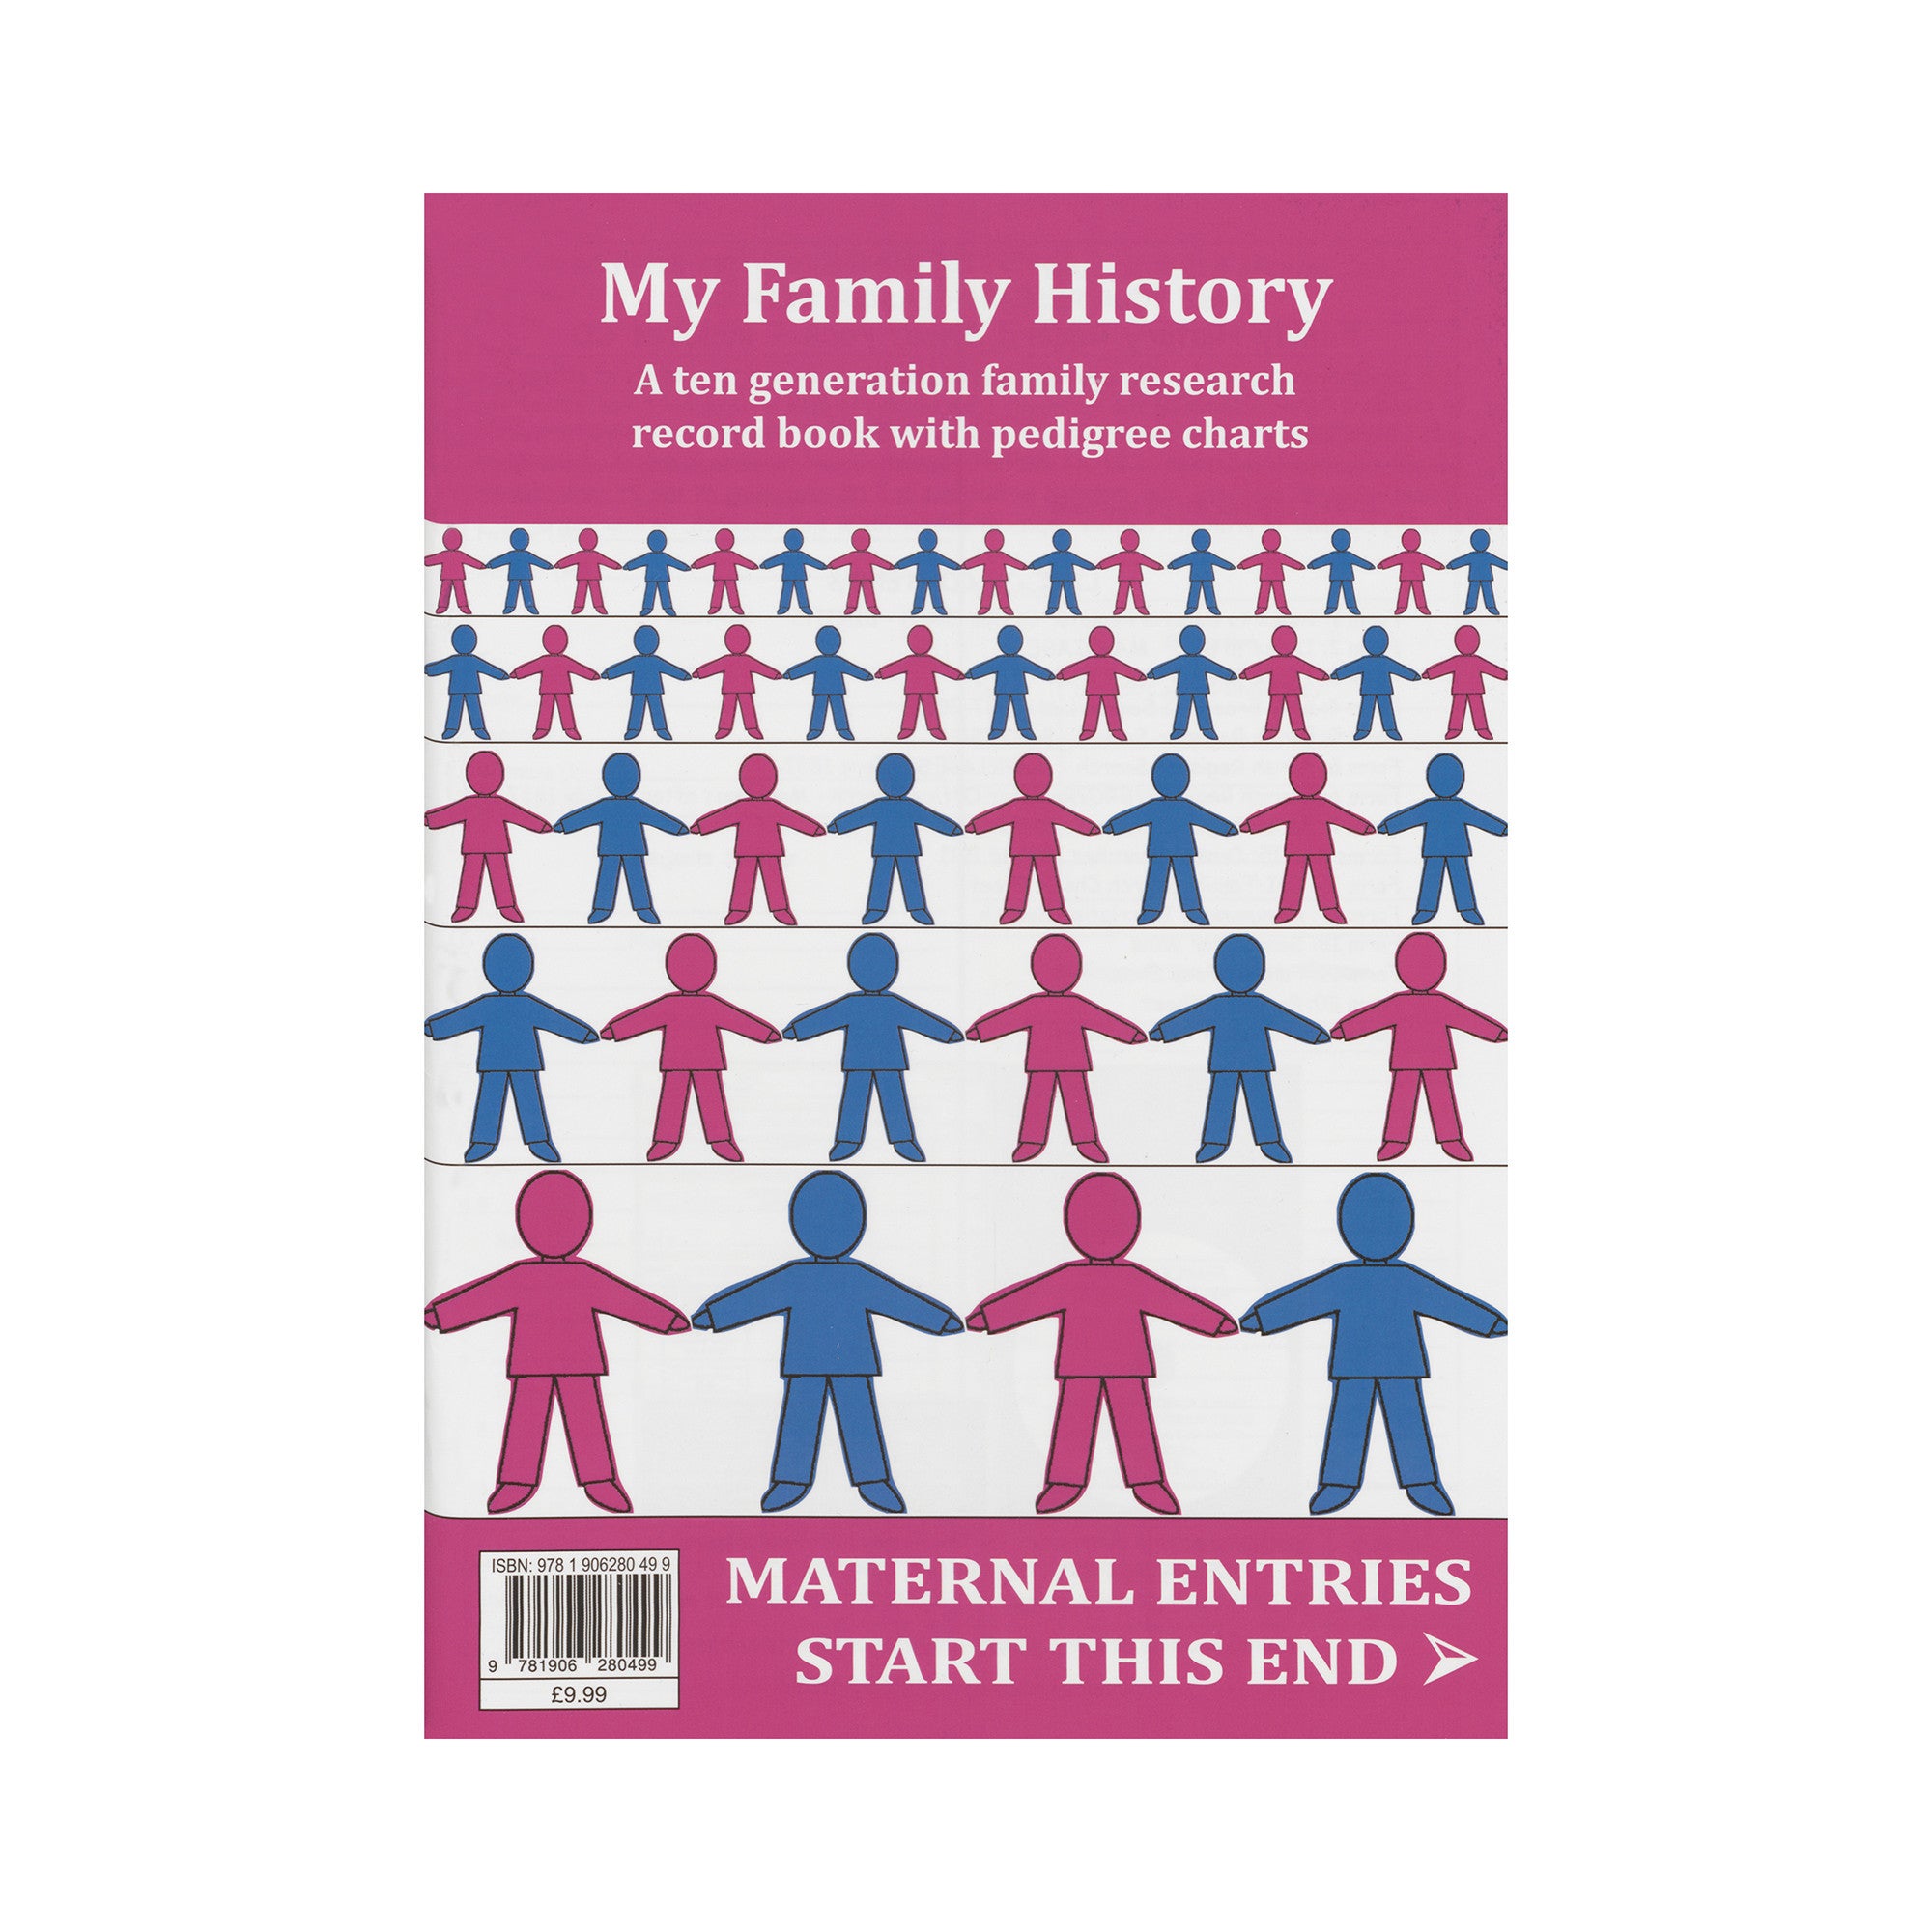 My Family History - A 10 generation family research record book with pedigree charts - National Library of Wales Online Shop / Siop Arlein Llyfrgell Genedlaethol Cymru